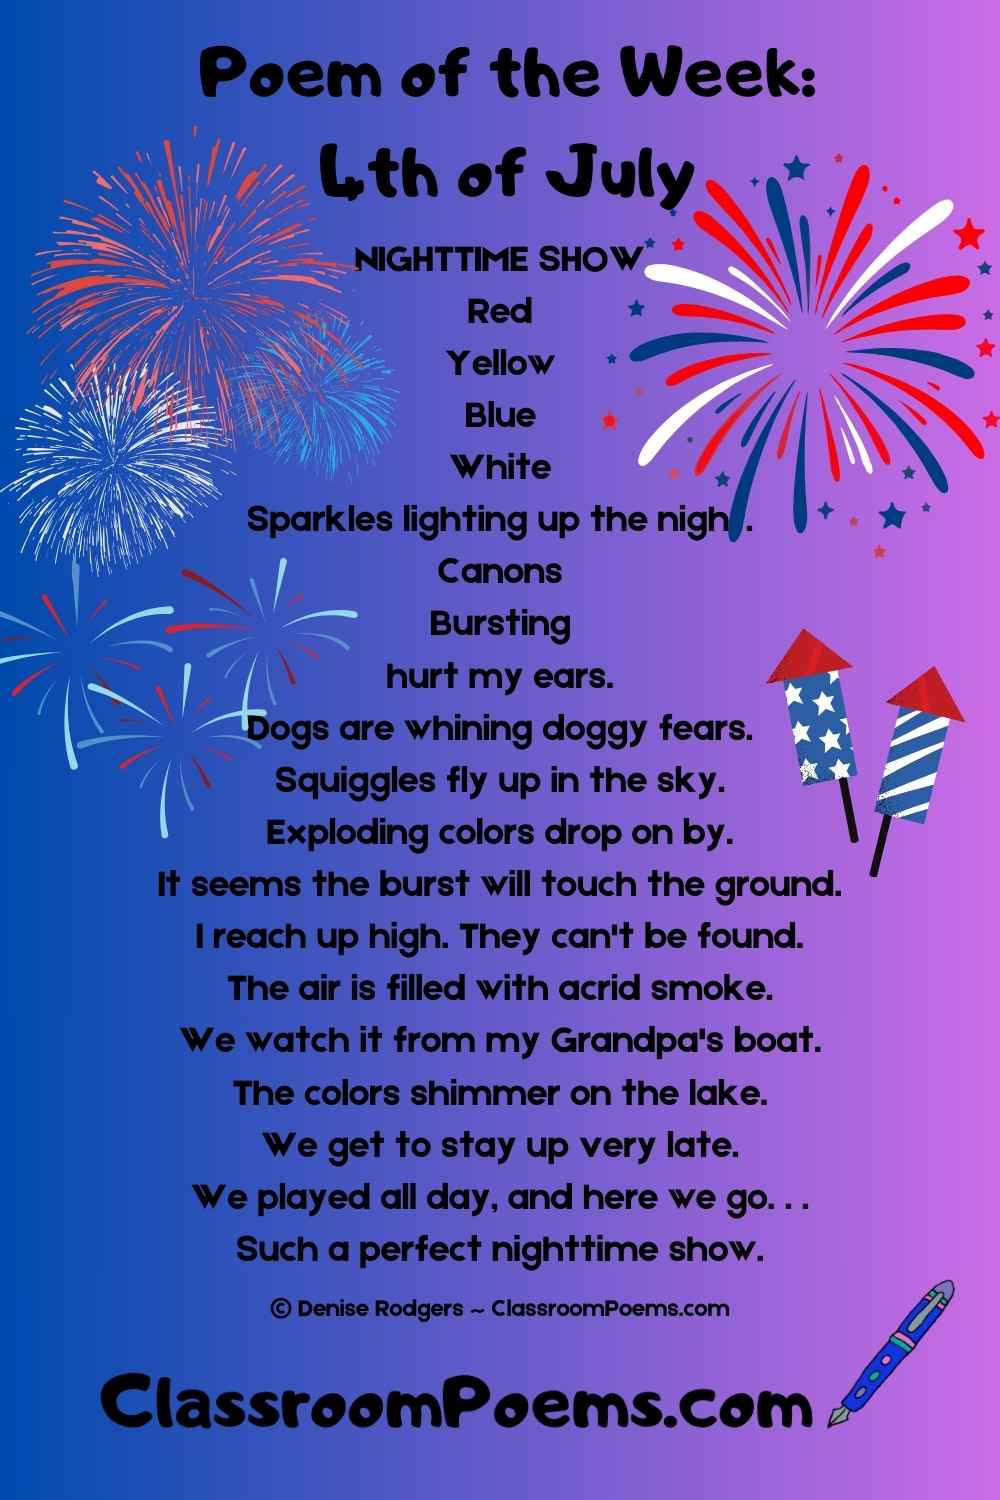 A Fourth of July Poem of the Week by Denise Rodgers on ClassroomPoems.com.